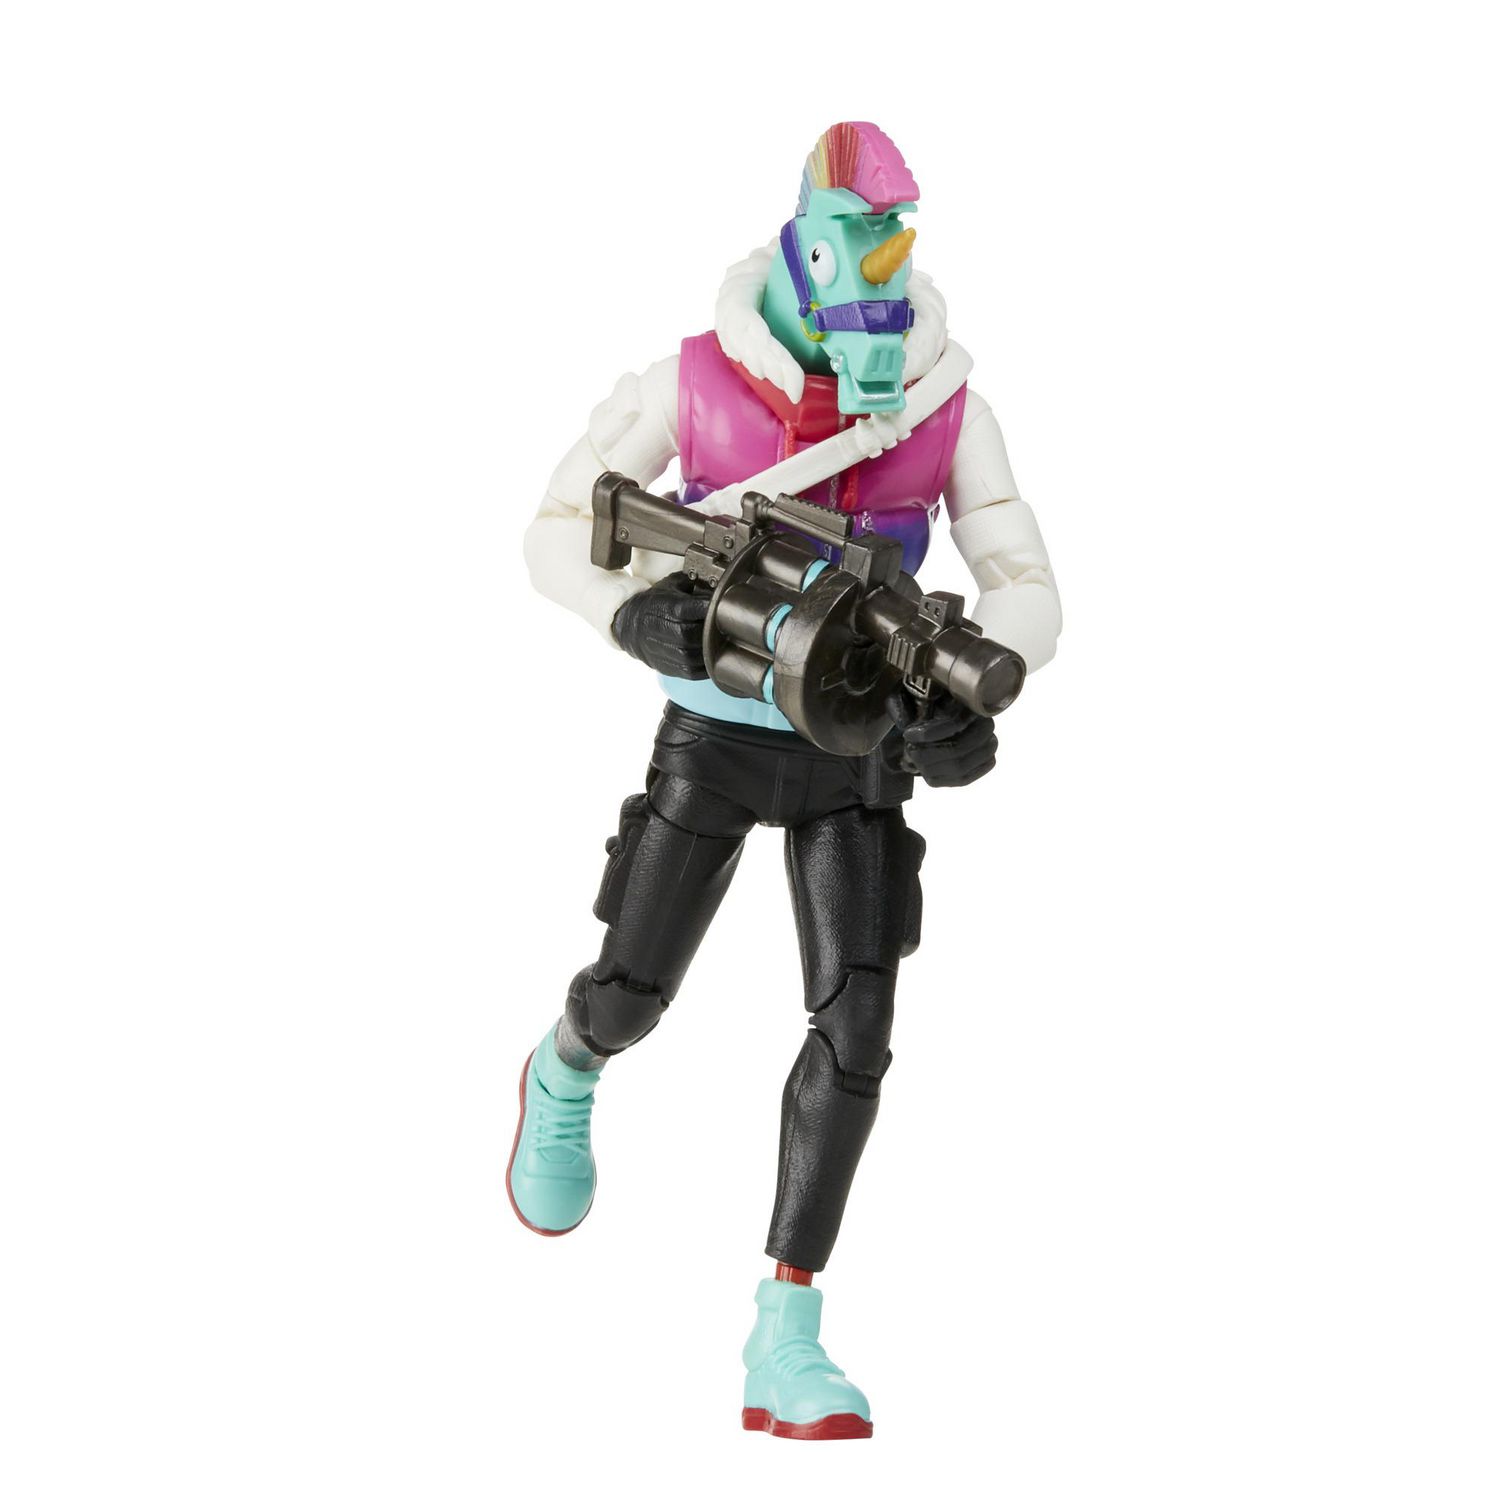 Fortnite Victory Royale Llambro 6 in Action Figure